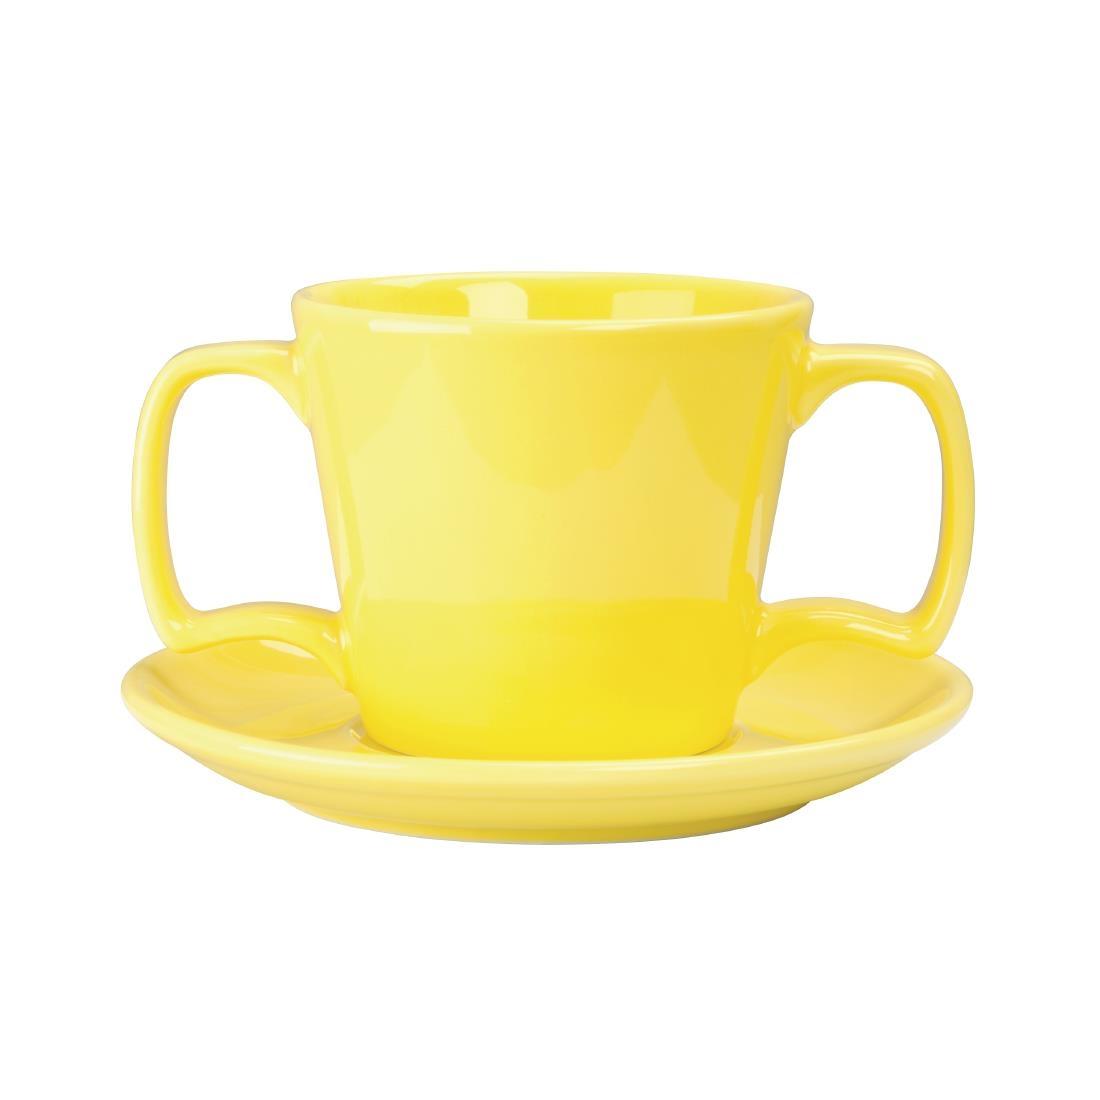 Olympia Heritage Double Handle Mugs Yellow 300ml (Pack of 6) - DW149  - 2